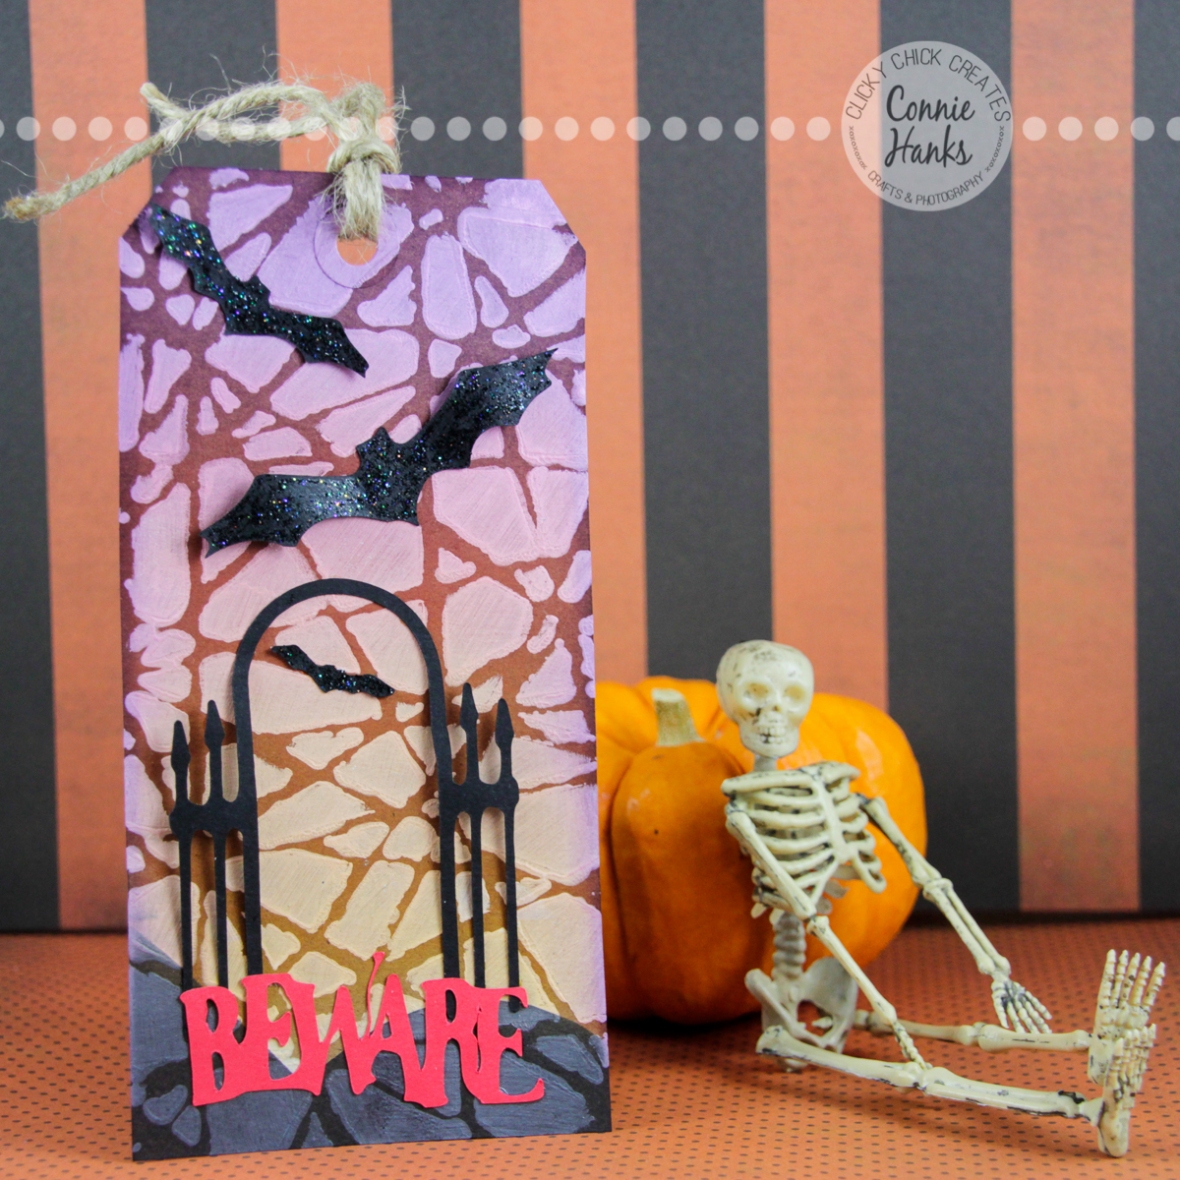 Connie Hanks Photography // ClickyChickCreates.com // Halloween Tags, ghostess hostess gift, bats, gate, beware, spooky, shattered, Tim Holtz Distress Ink, Ranger Ink, Slice, gesso